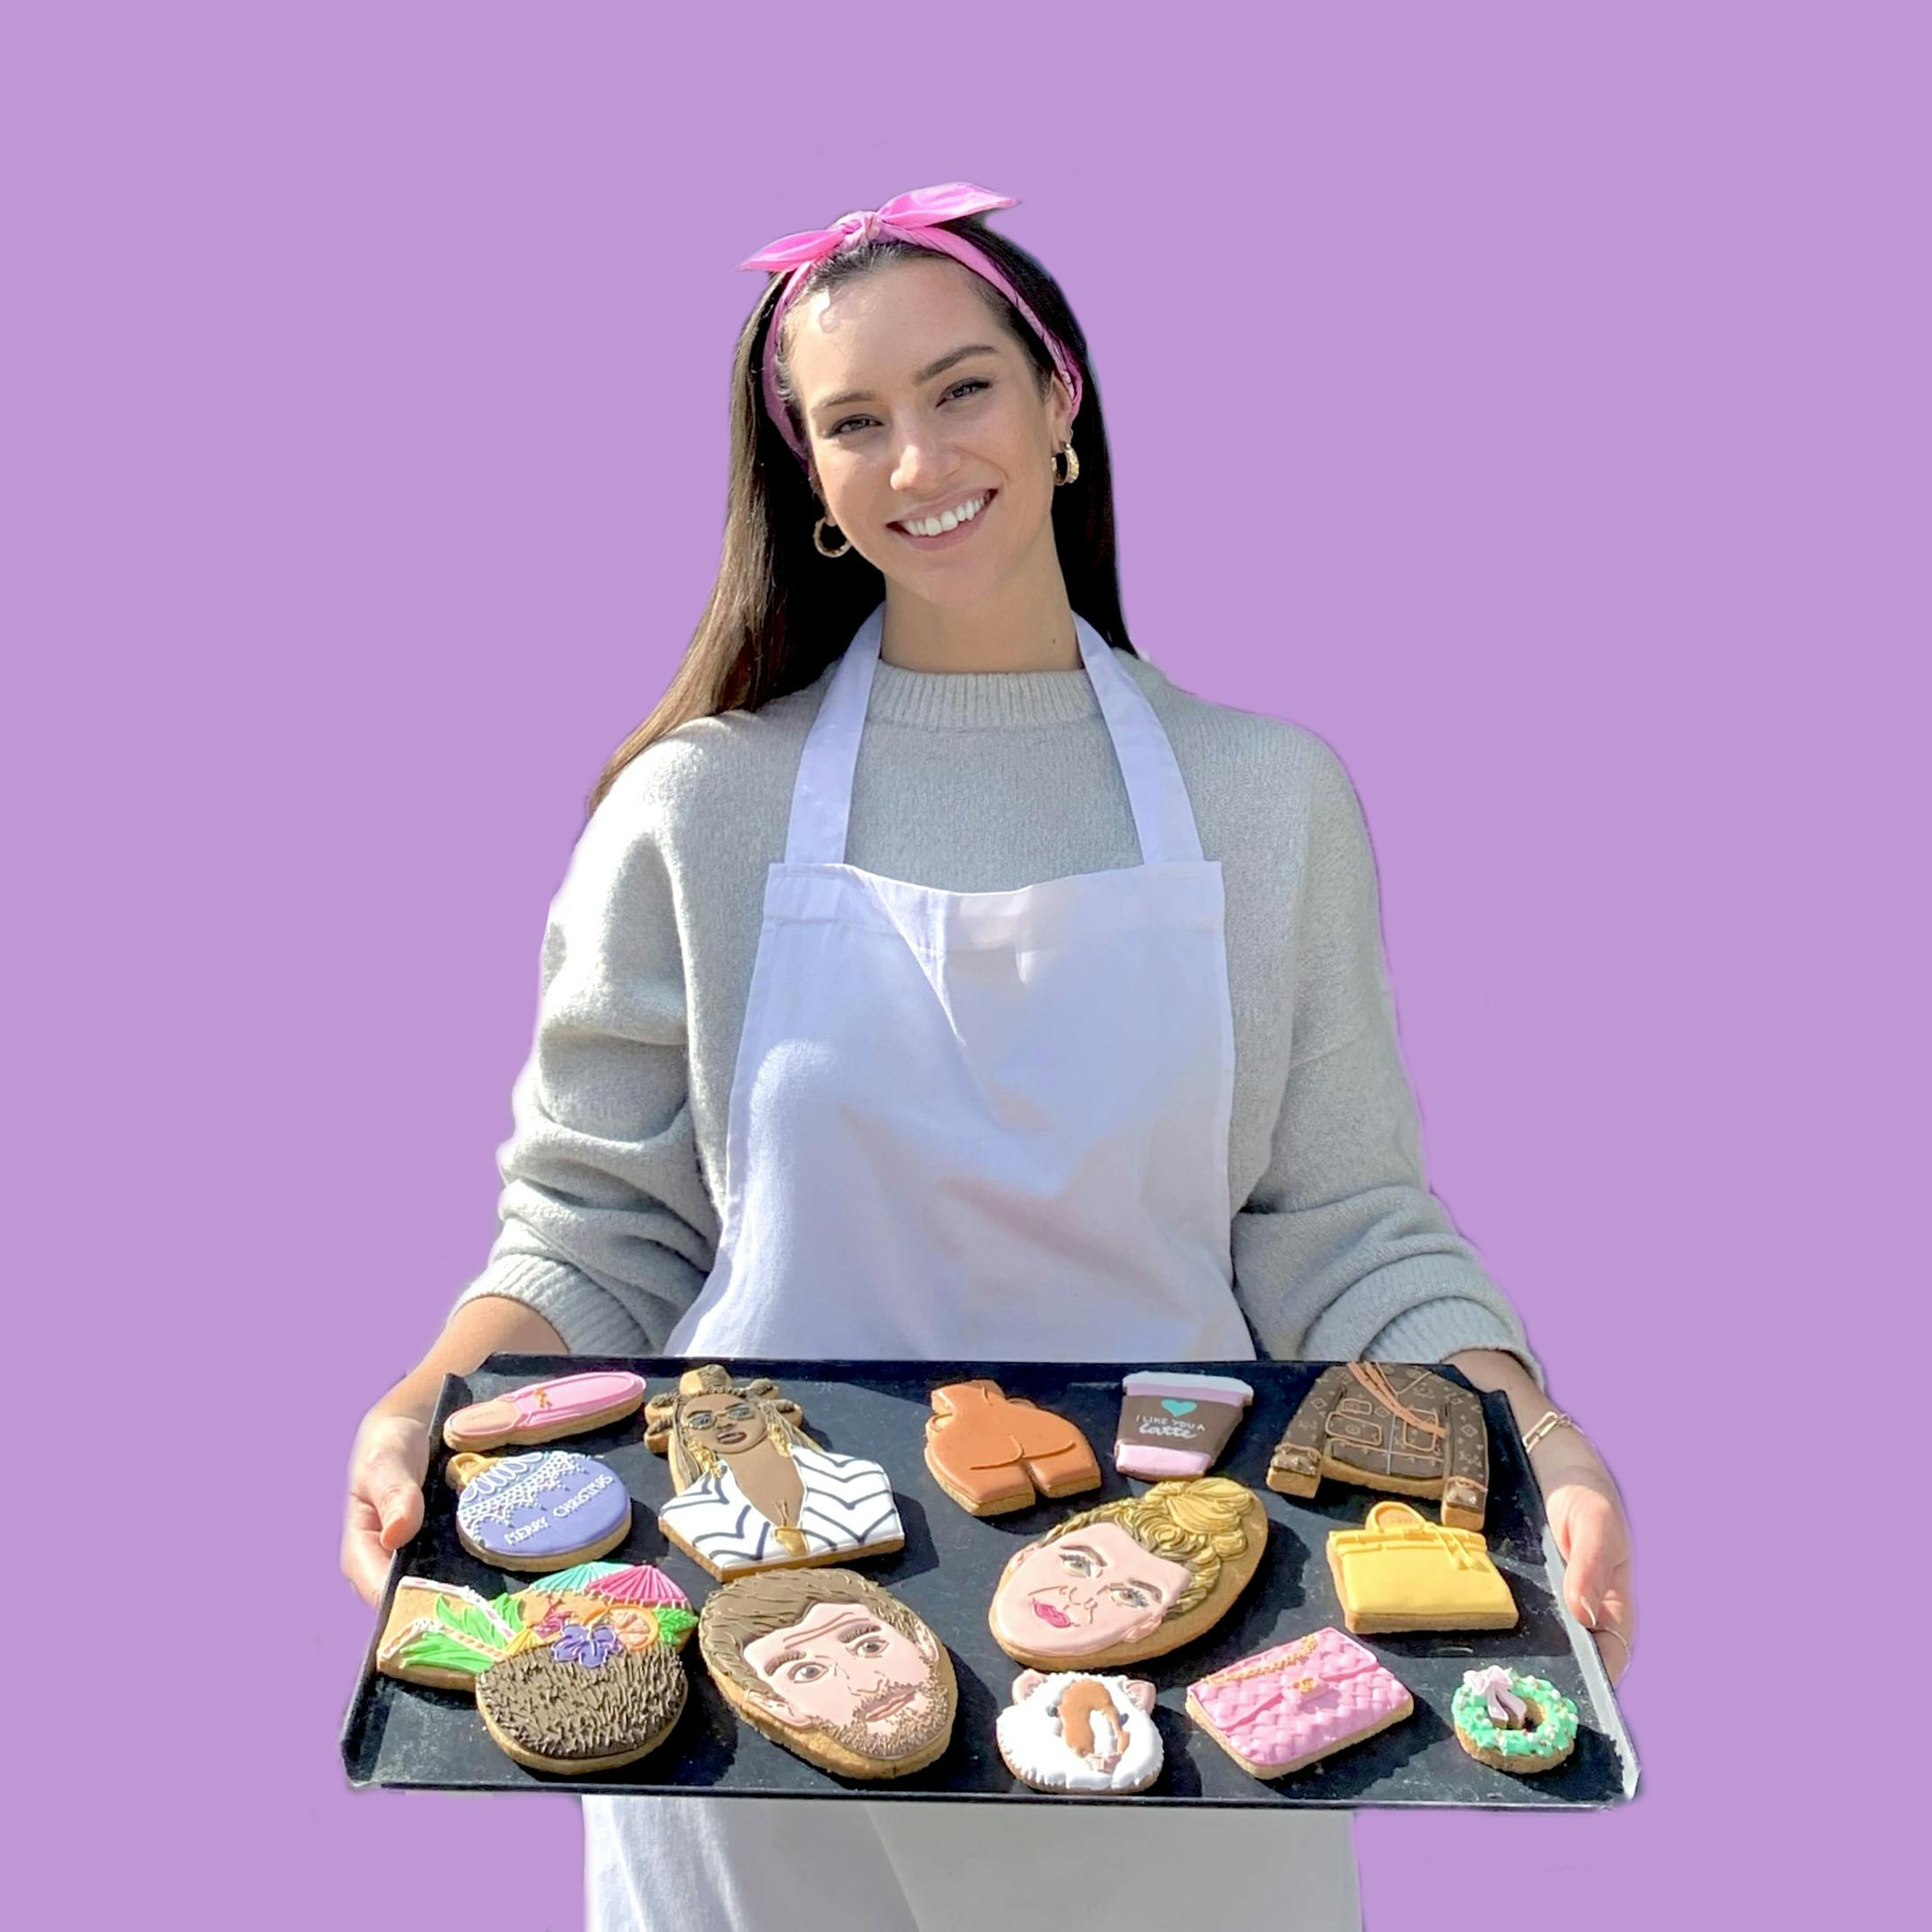 https://images.prismic.io/bakedbysteph/ee253893-5b1b-410d-881b-708b26a0a212_Baked+by+Steph+-+Outside+bakery+purple.jpg?auto=compress,format